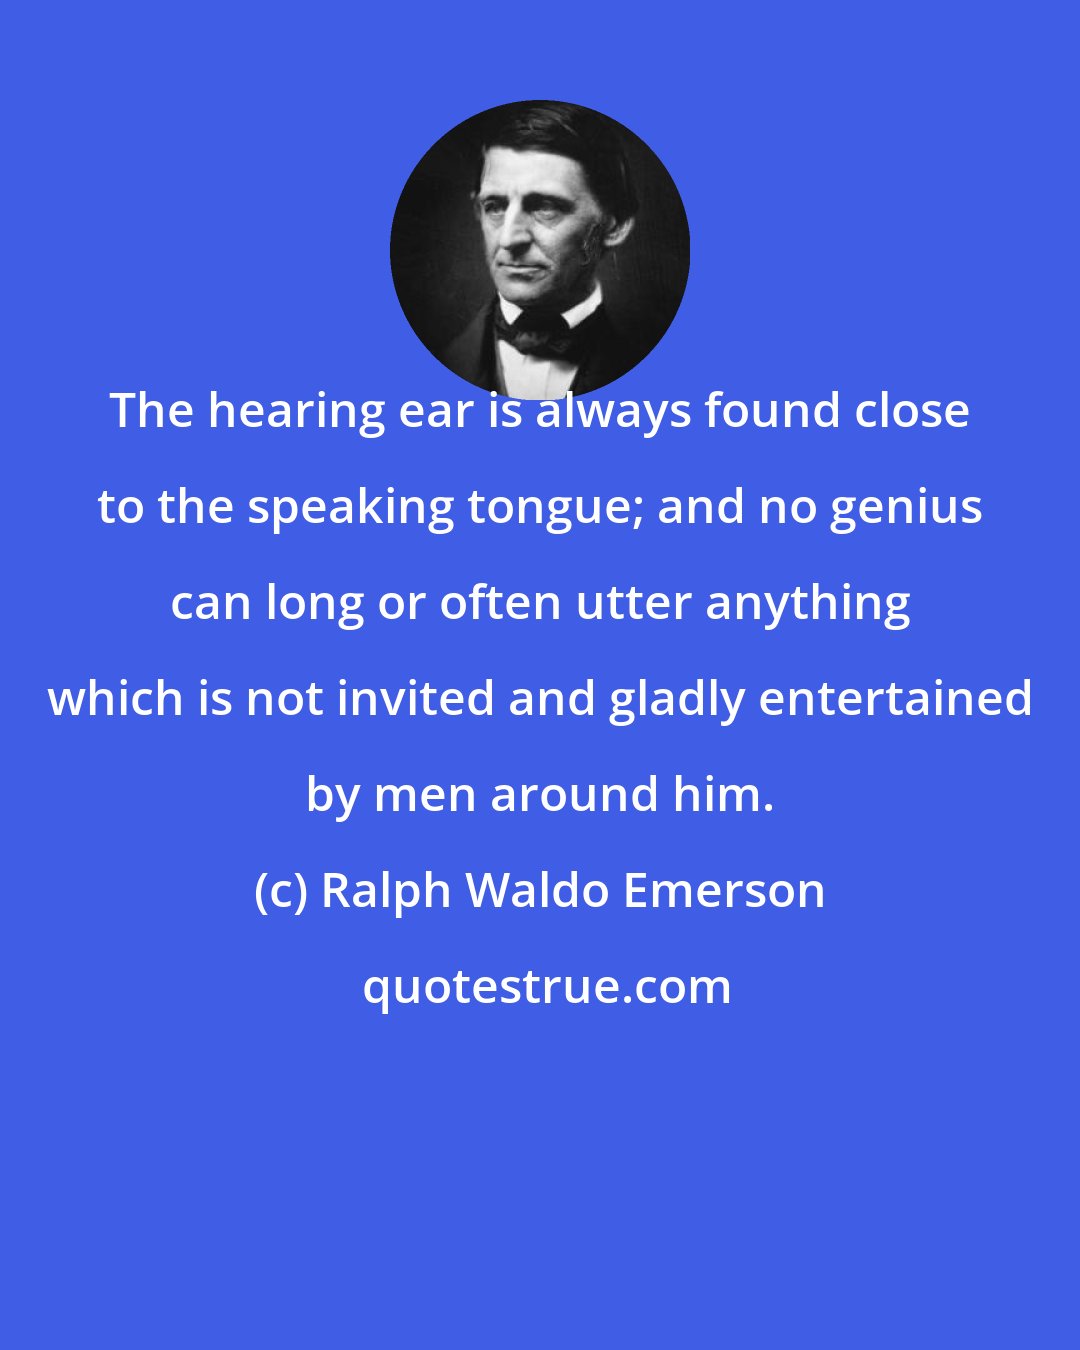 Ralph Waldo Emerson: The hearing ear is always found close to the speaking tongue; and no genius can long or often utter anything which is not invited and gladly entertained by men around him.